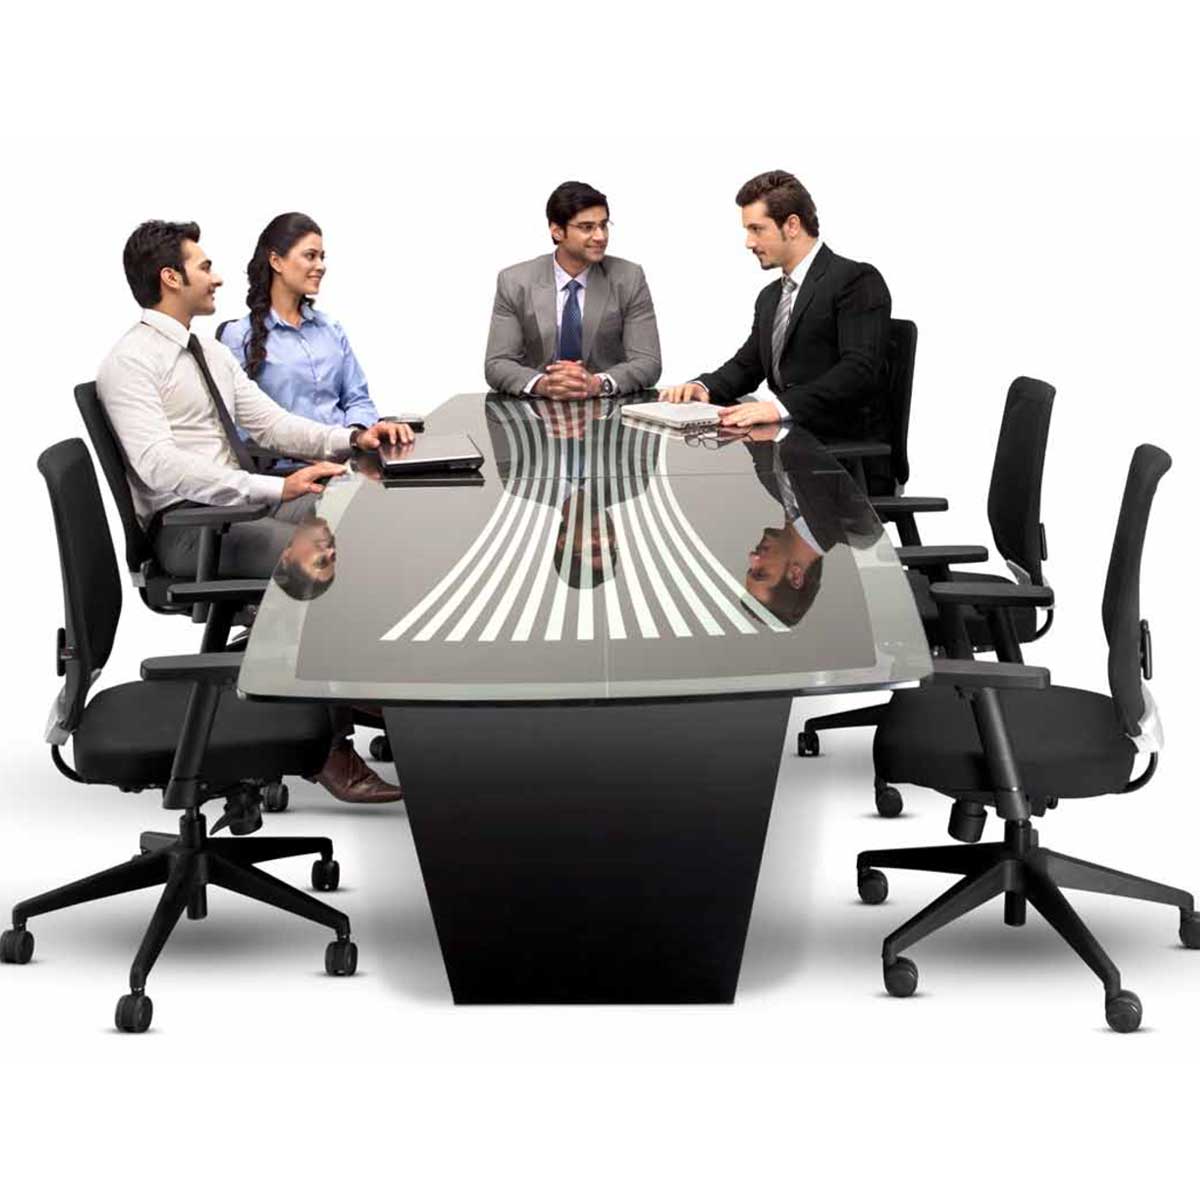 Conference table Manufacturers, Suppliers in Lajpat Nagar